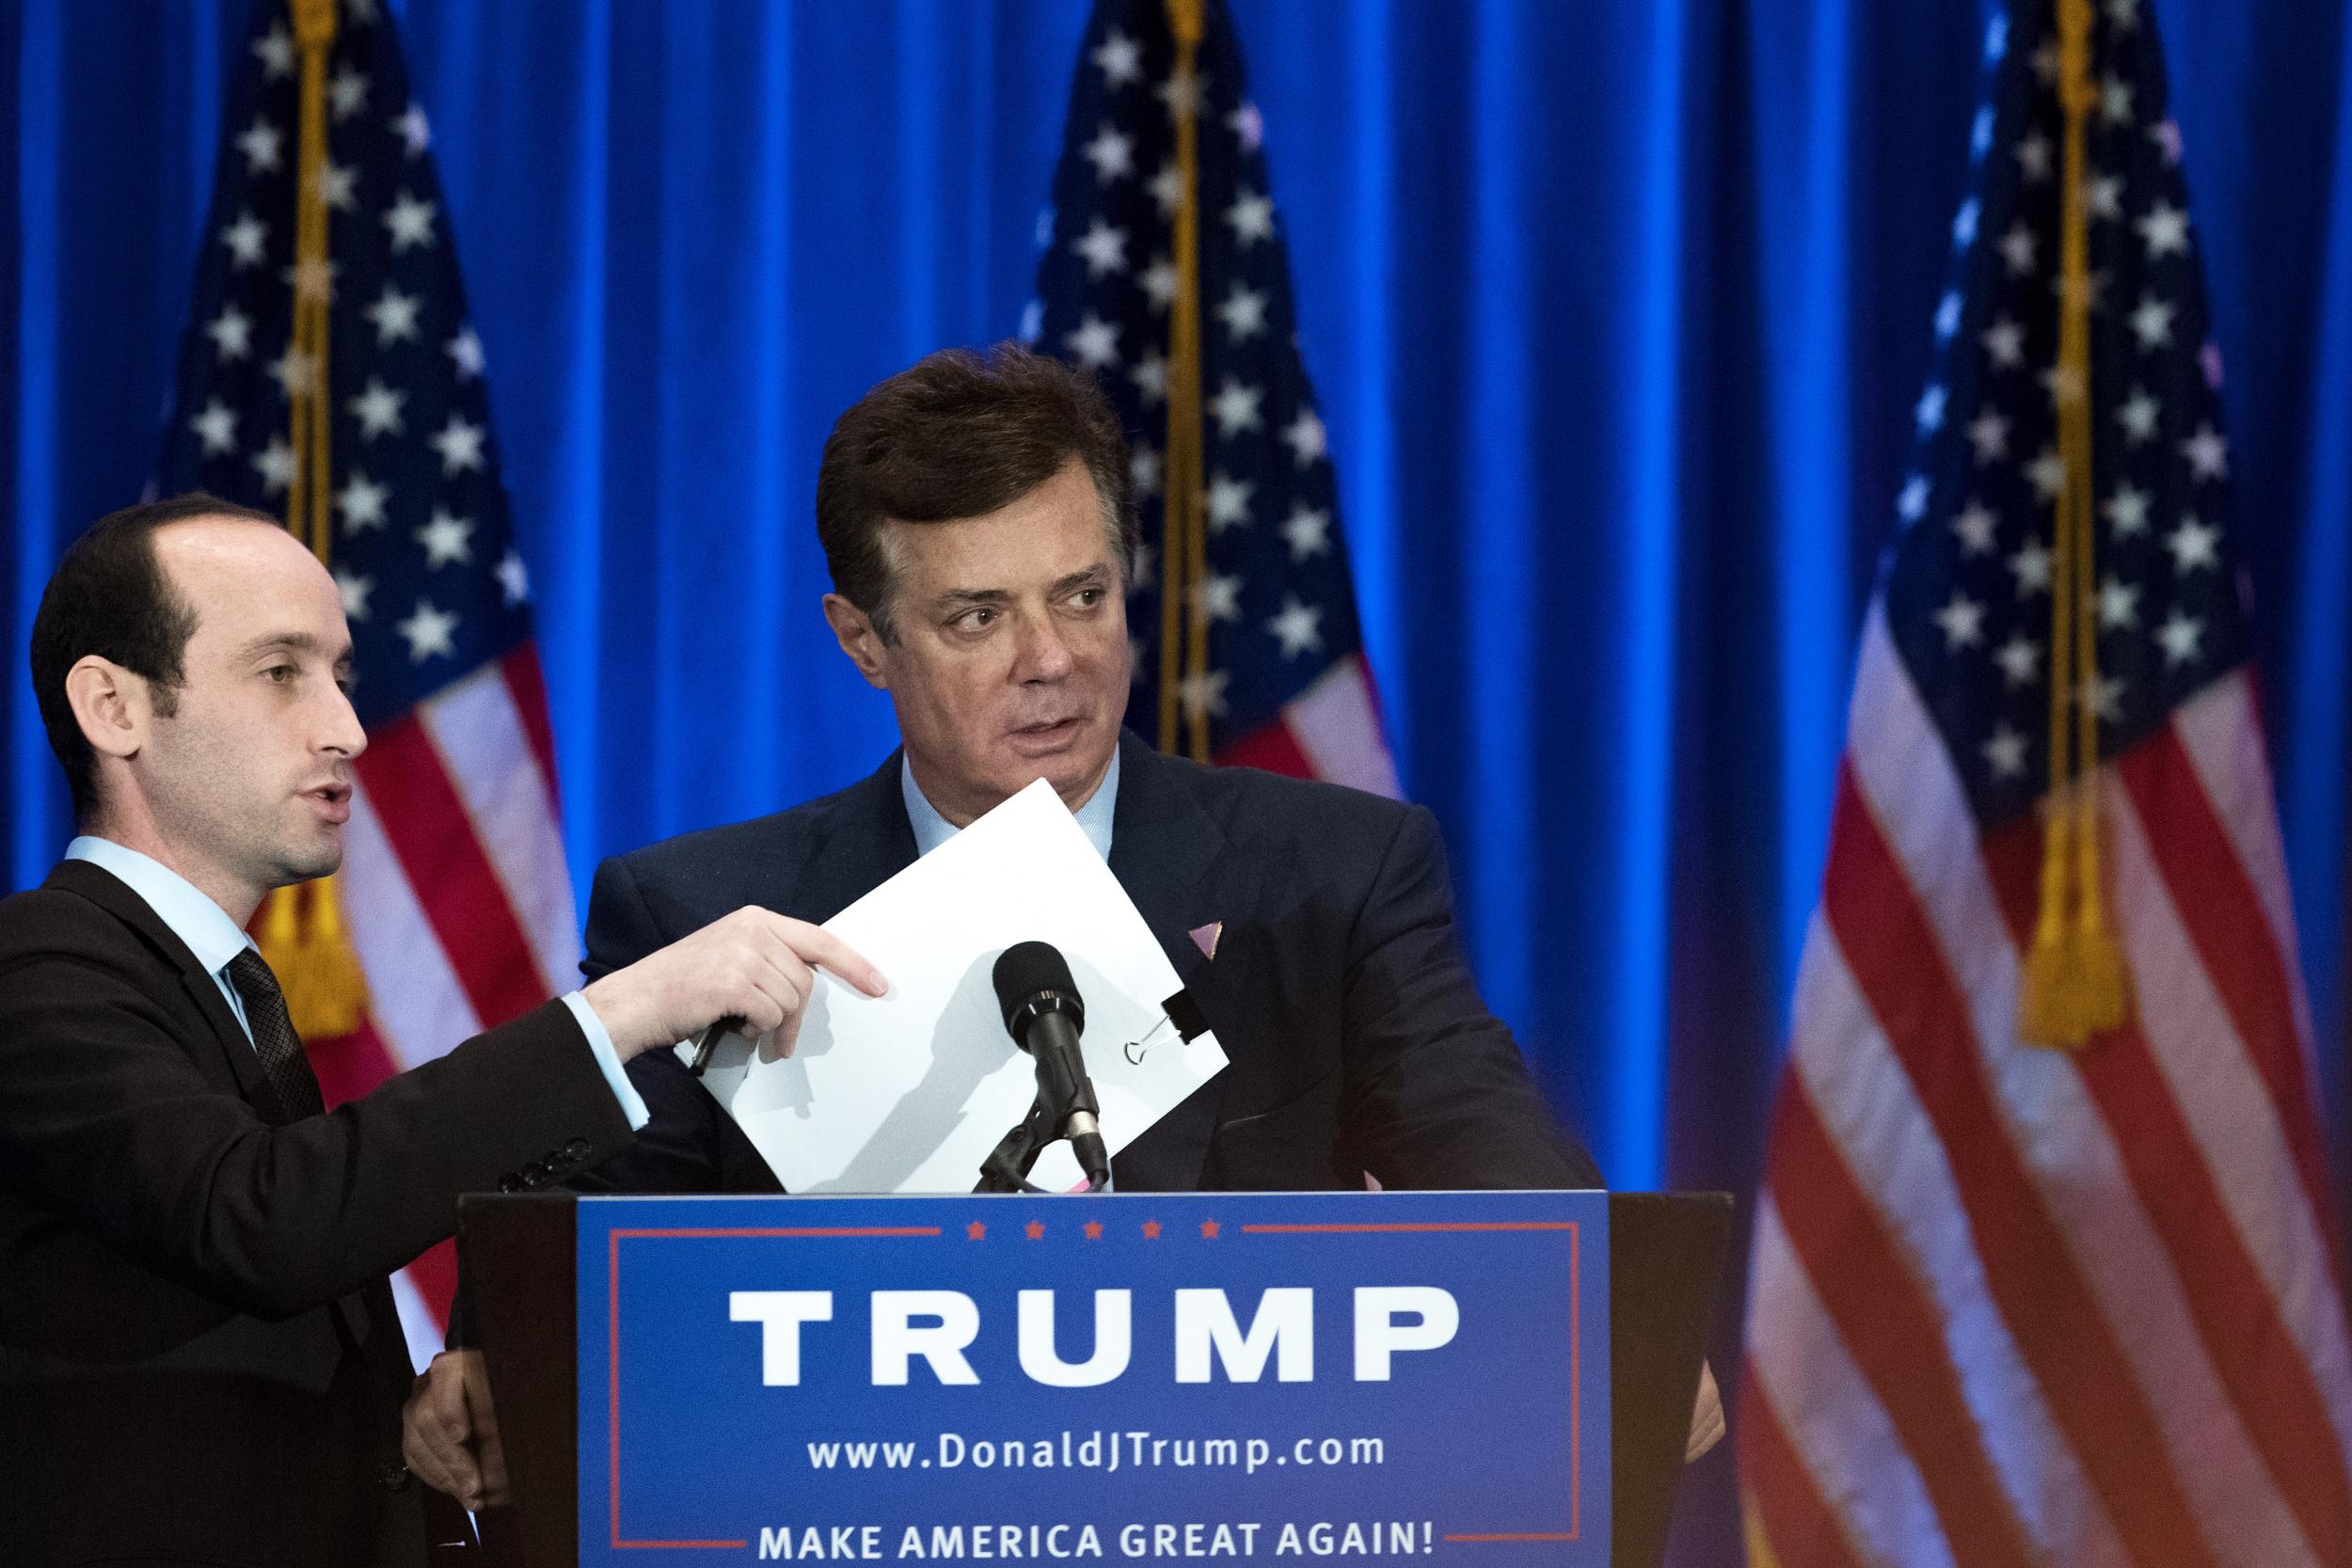 Mr Manafort served as Donald Trump's campaign manager for three months